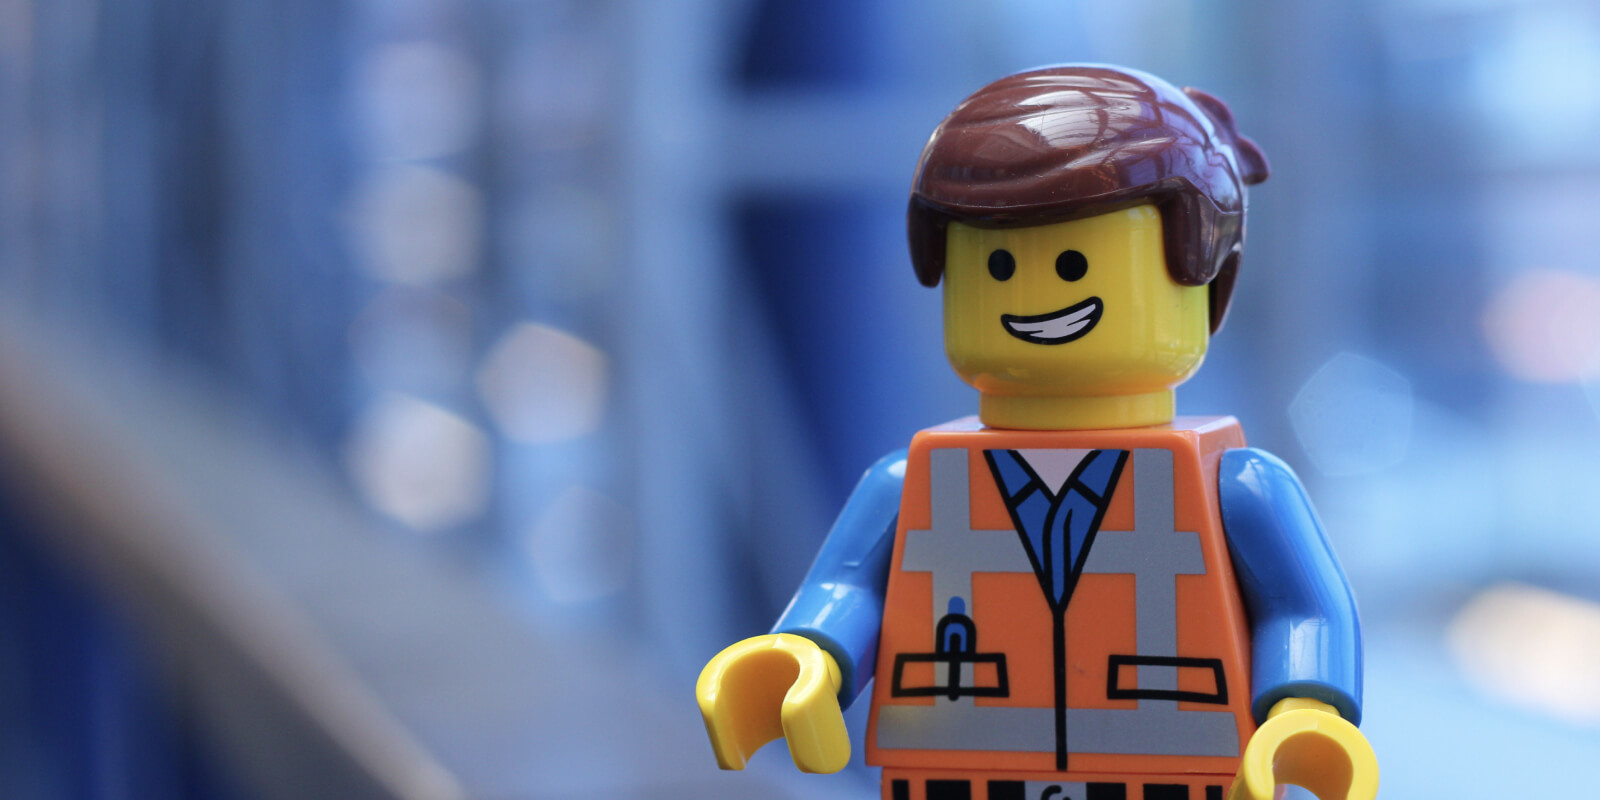 Photo of a lego man that looks like he is offering a hand shake...